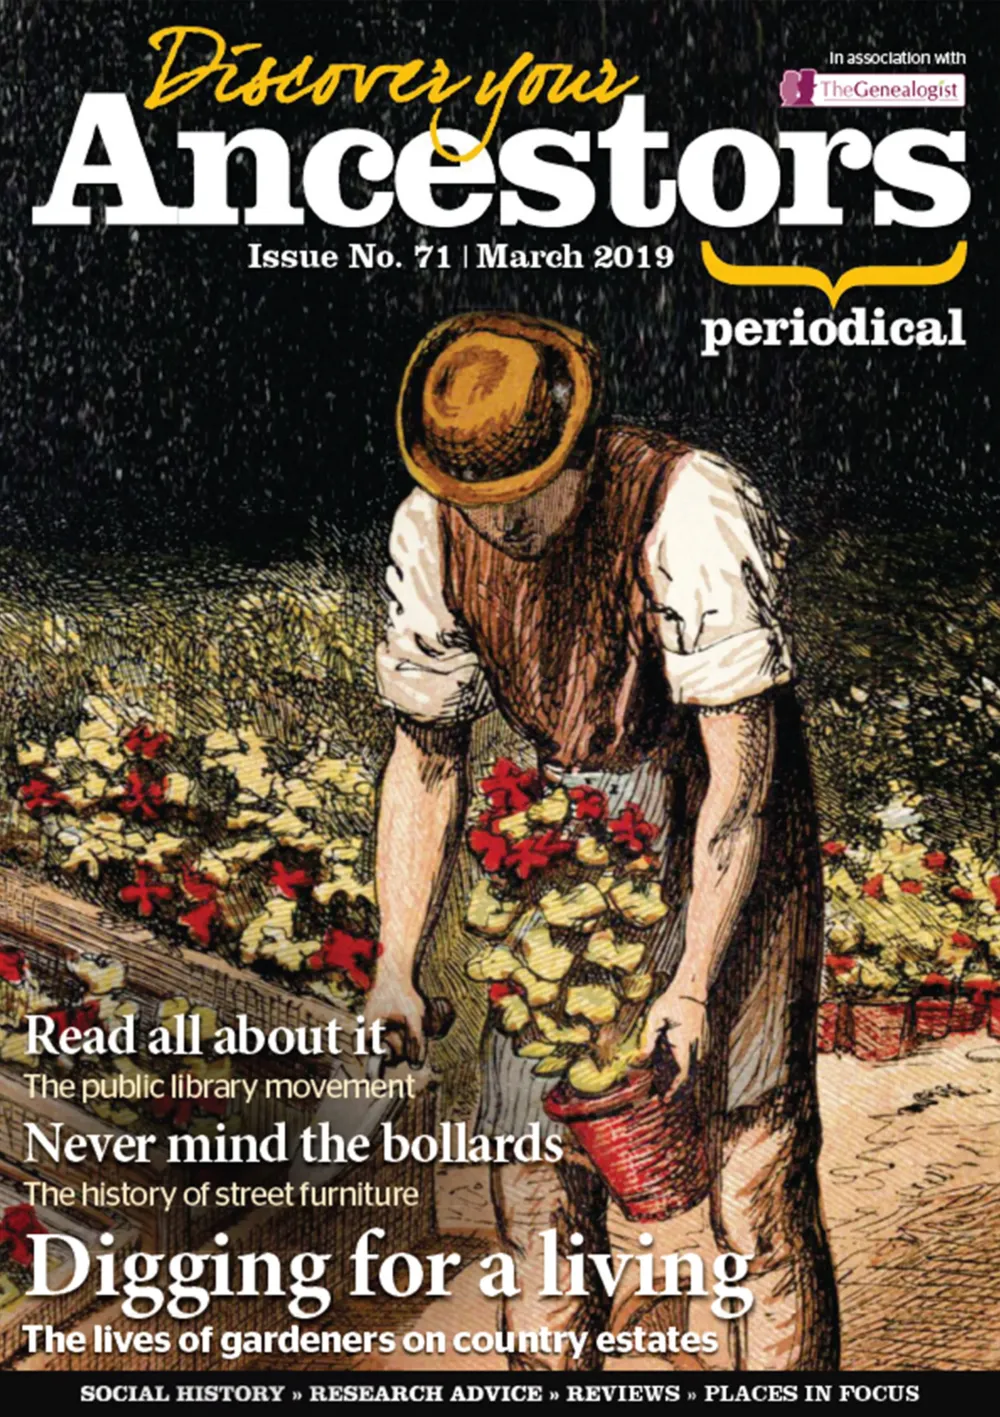 Discover Your Ancestors Periodical - March 2019